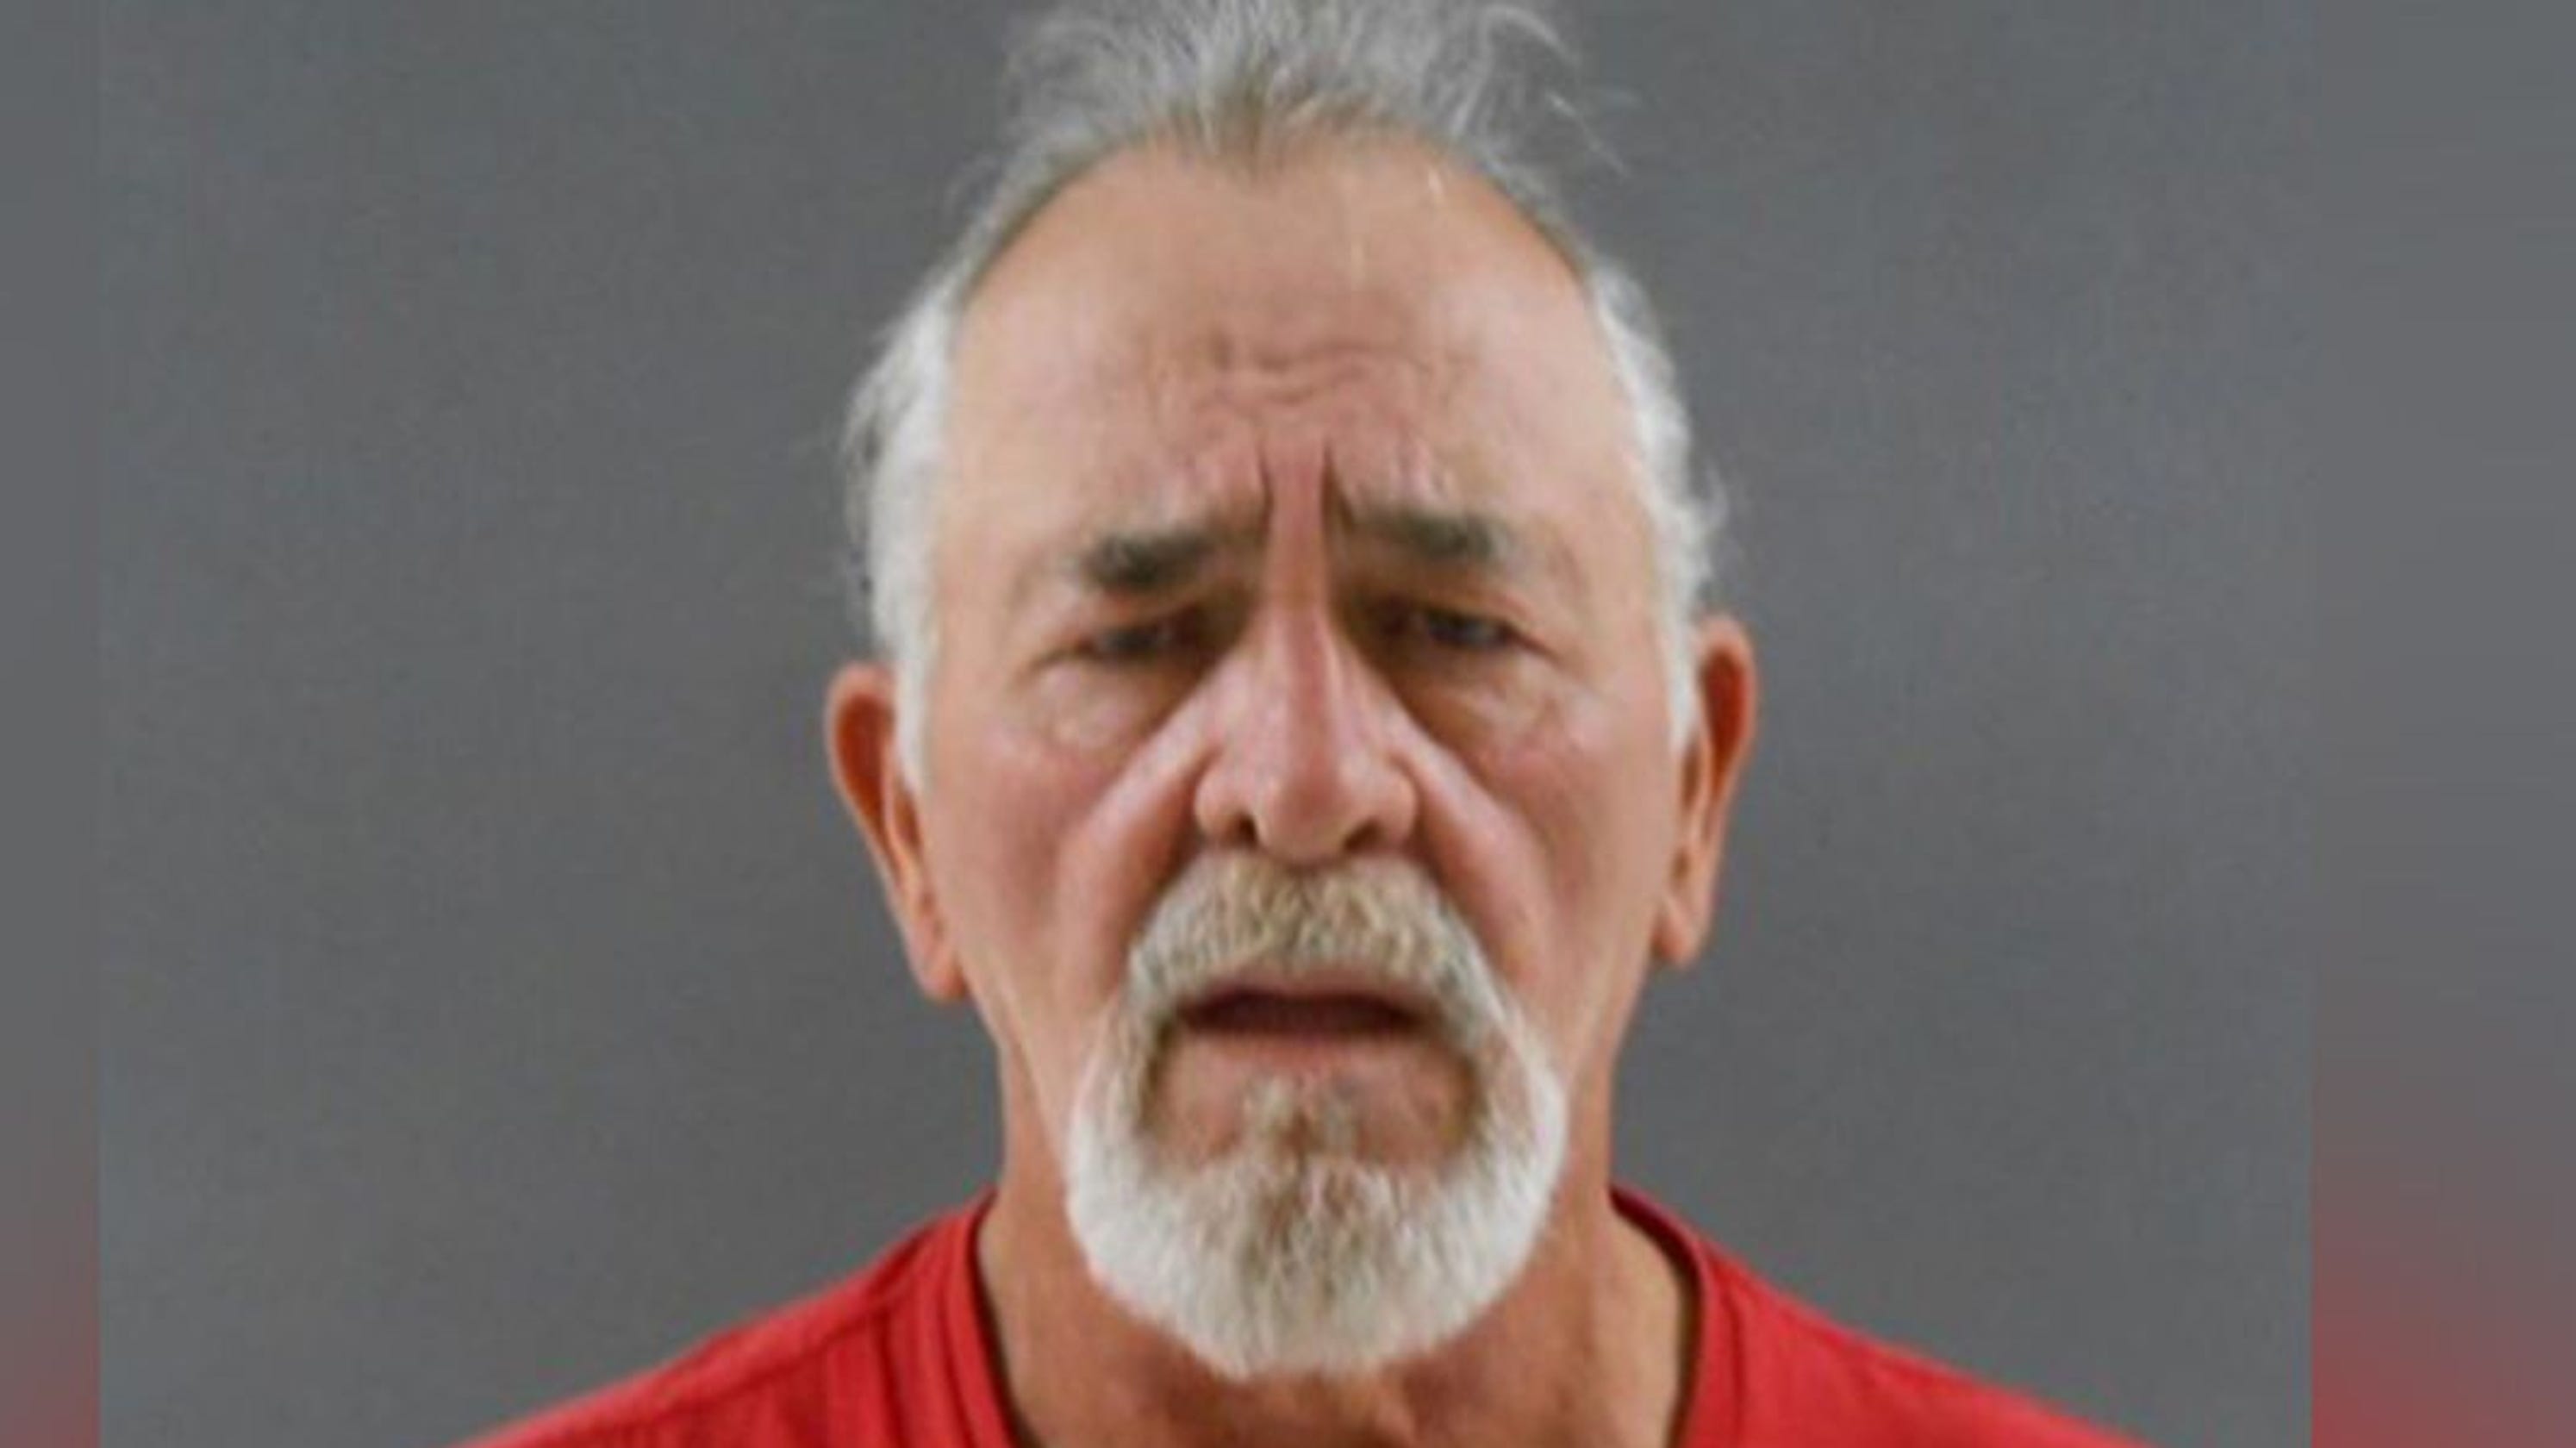 indiana sheriff offender Sex